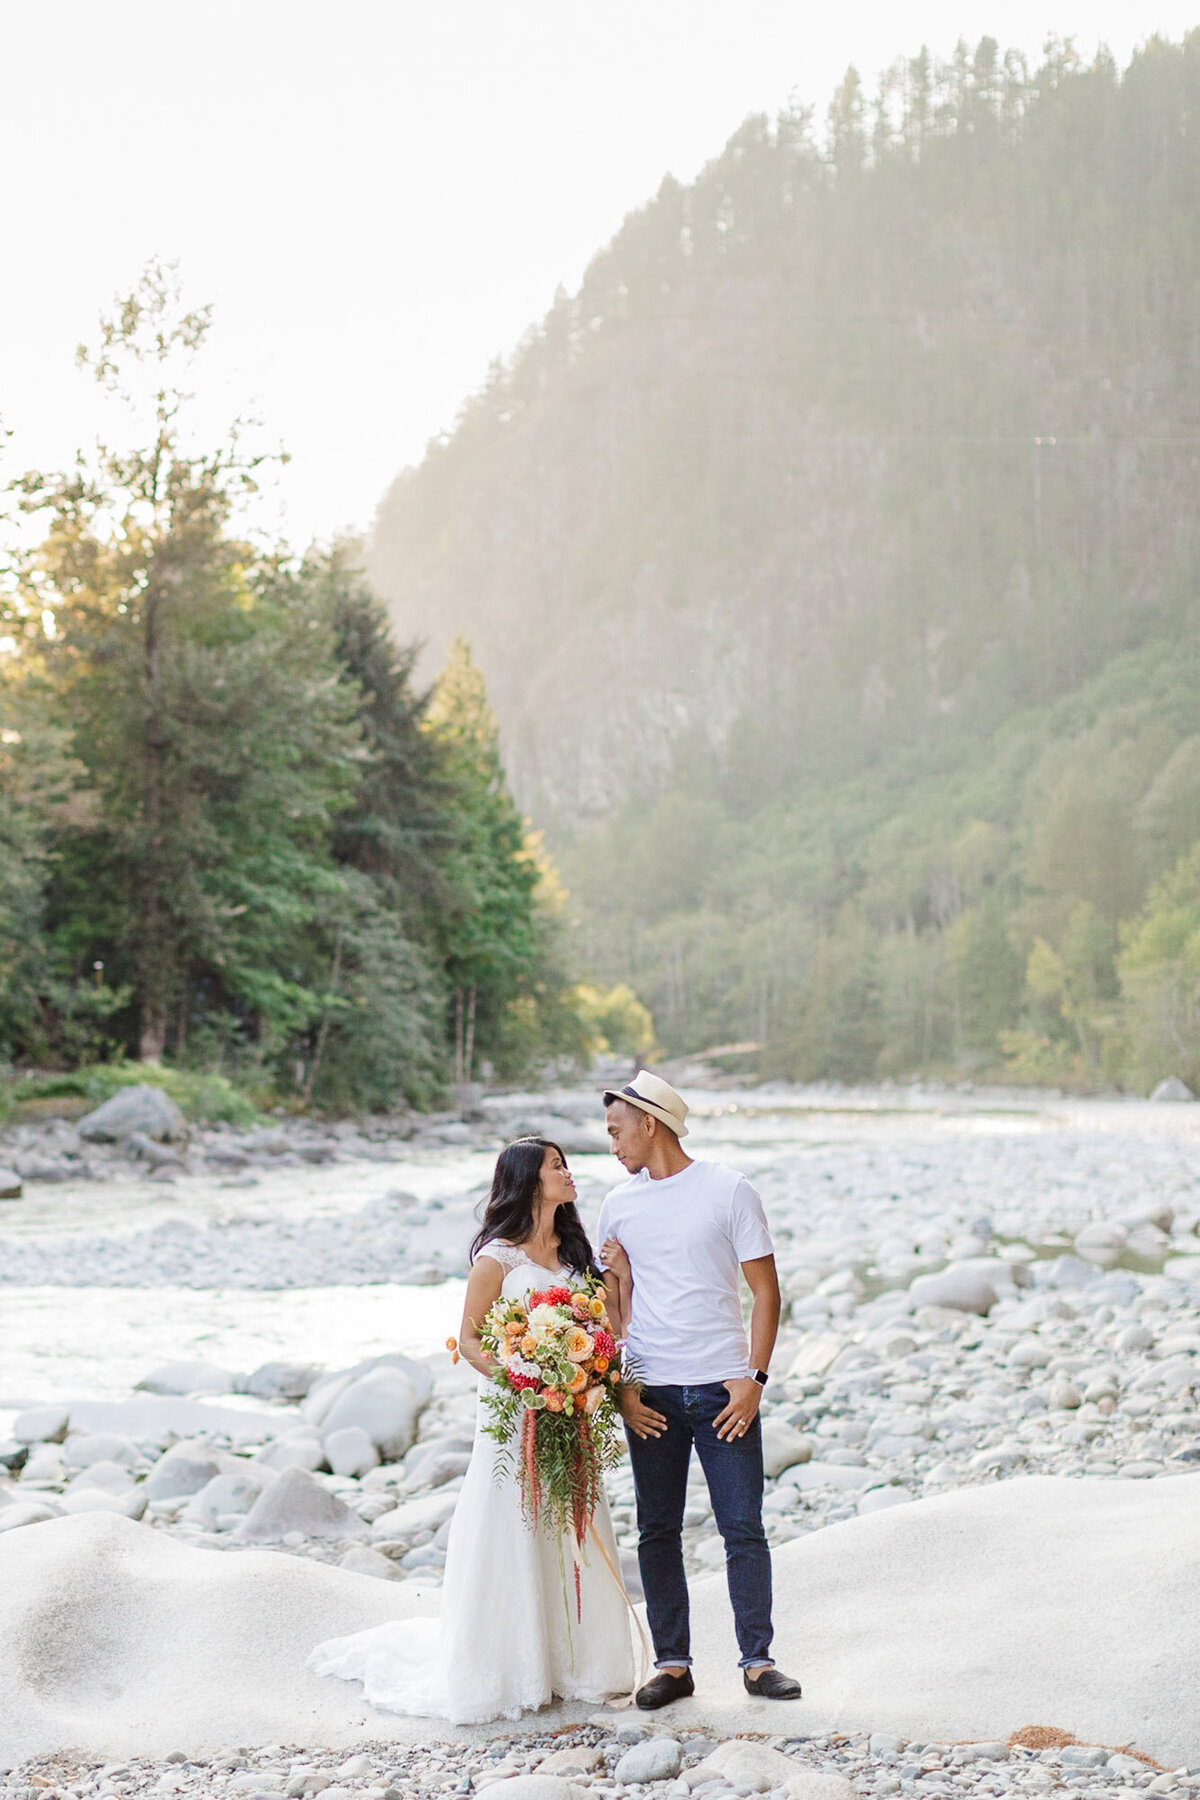 Bride-and-groom-share-a-moment-at-their-mountain-elopement-next-to-the-river-near-Seattle-WA-photo-by-Joanna-Monger-Photography